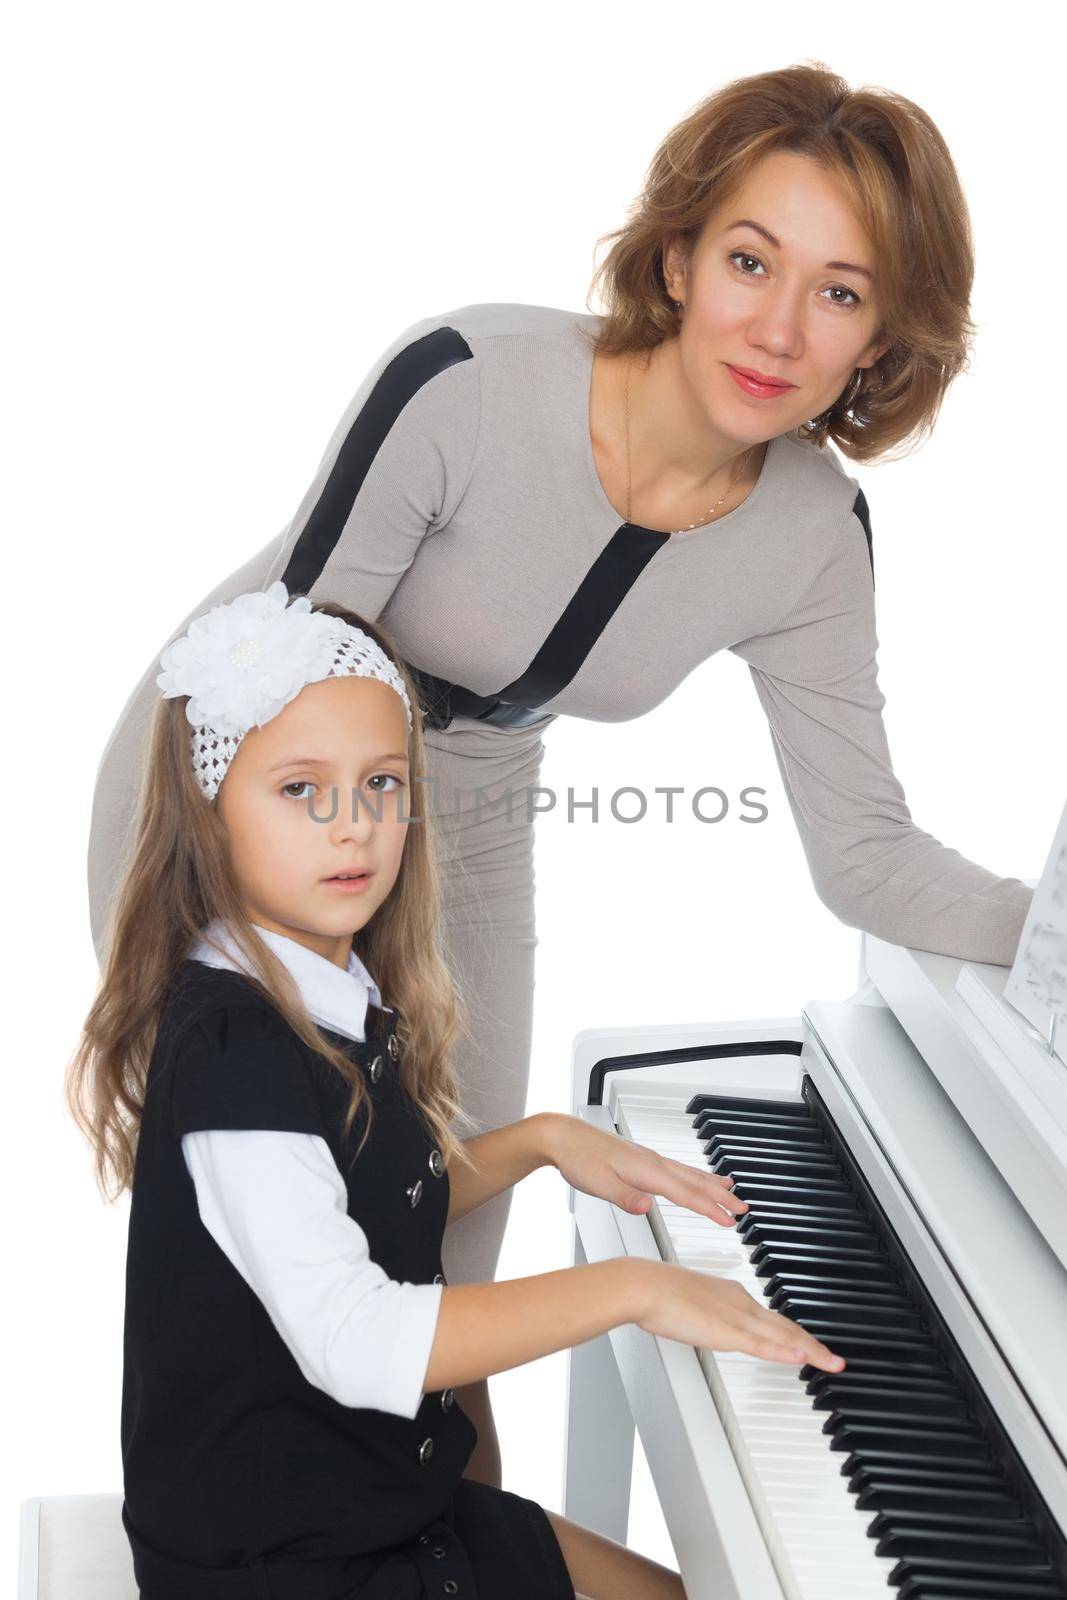 Mother and daughter learning to play piano - Isolated on white background